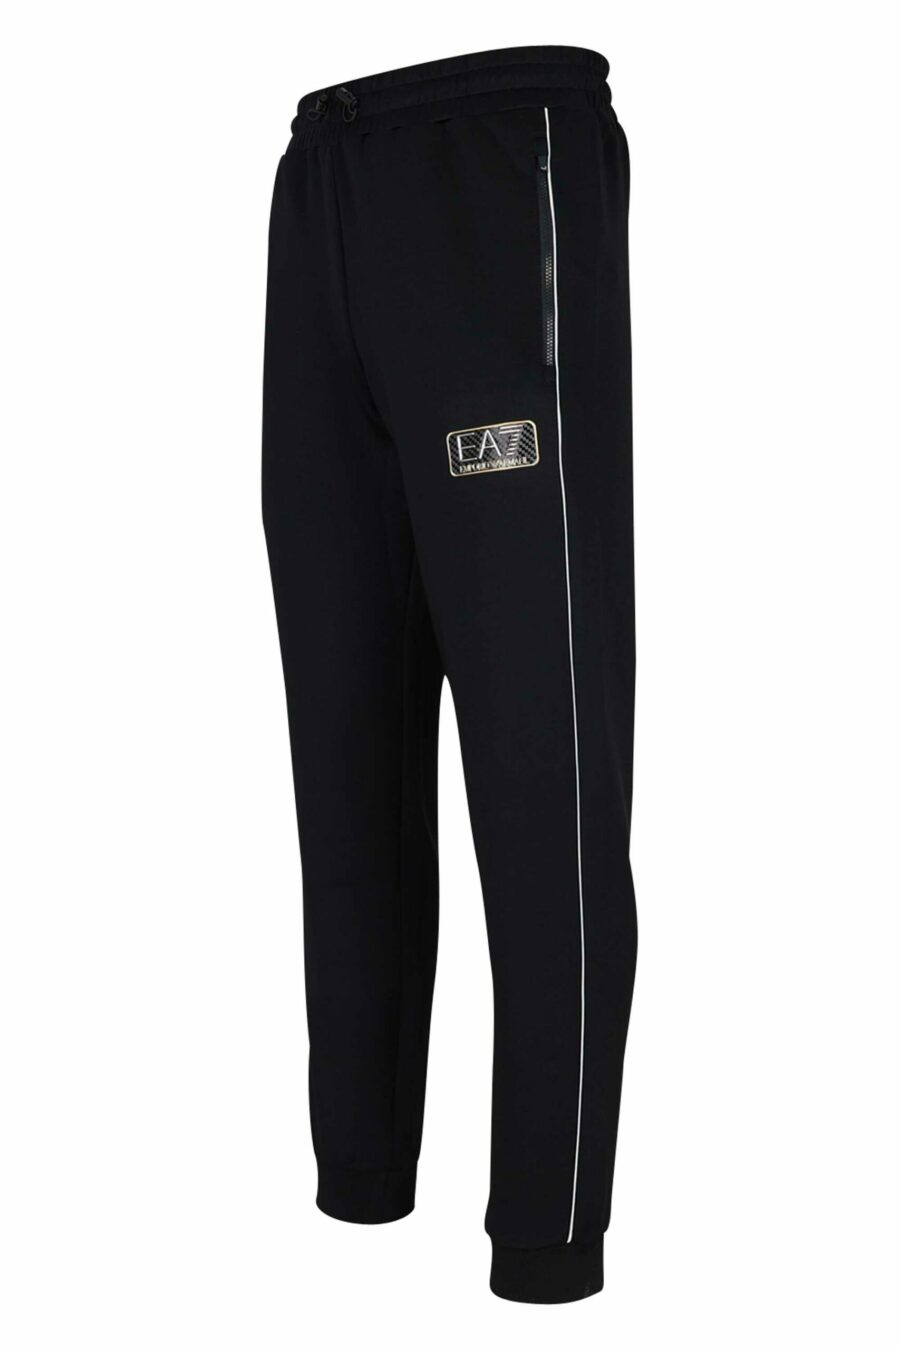 Tracksuit bottoms black with white stripes and metal logo "lux identity" - 8057767646189 1 scaled